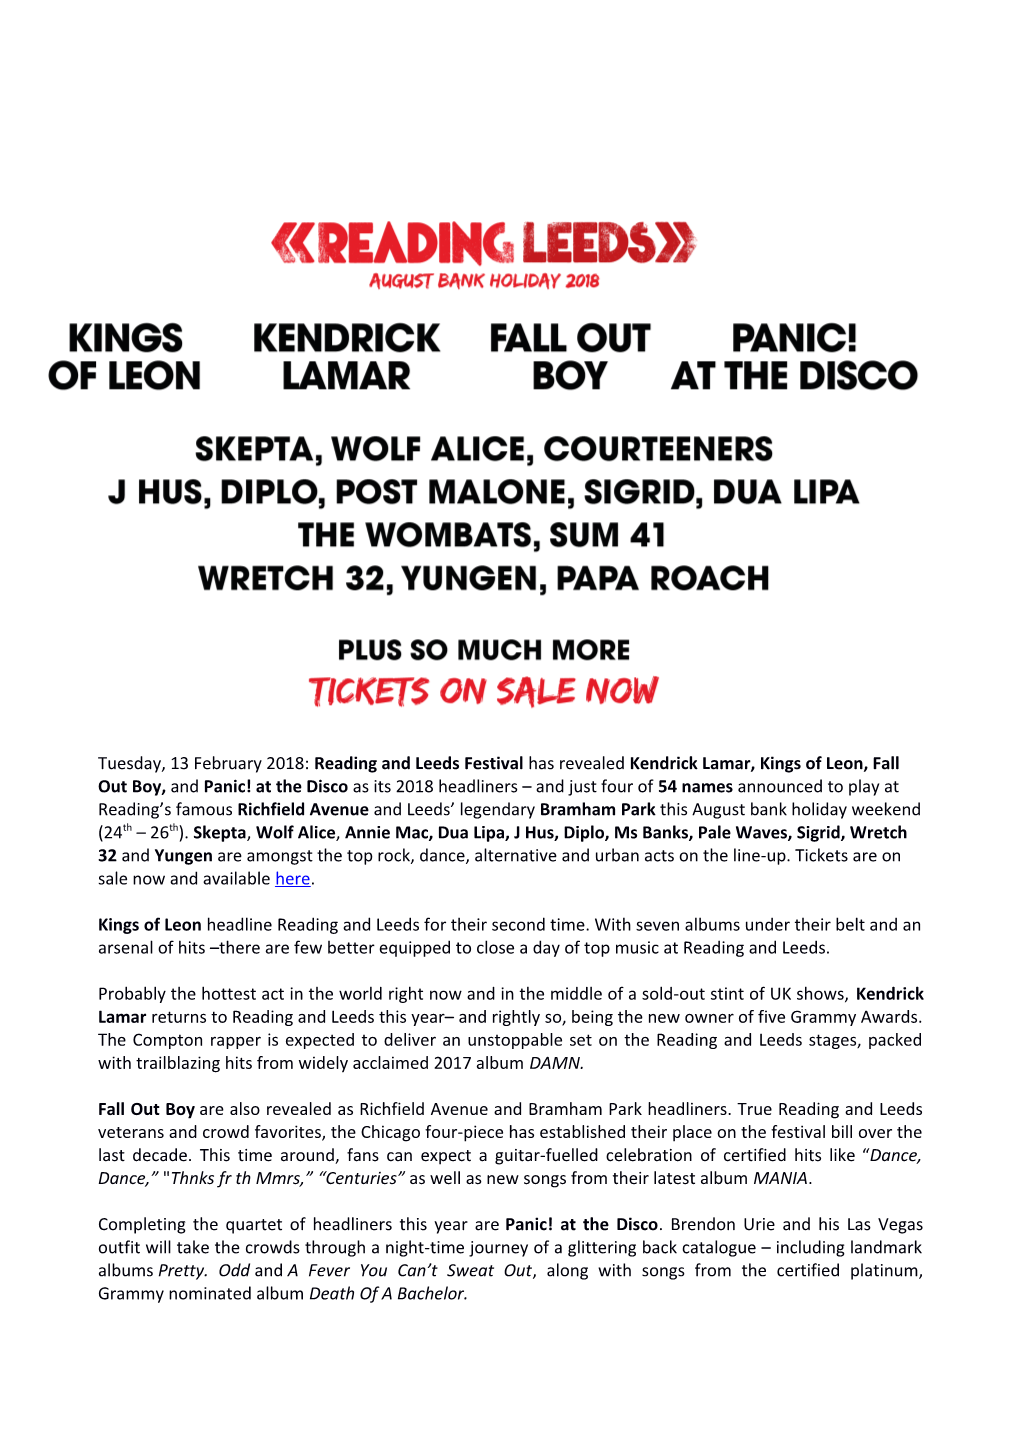 Kings of Leon Headline Reading and Leeds for Their Second Time. with Seven Albums Under